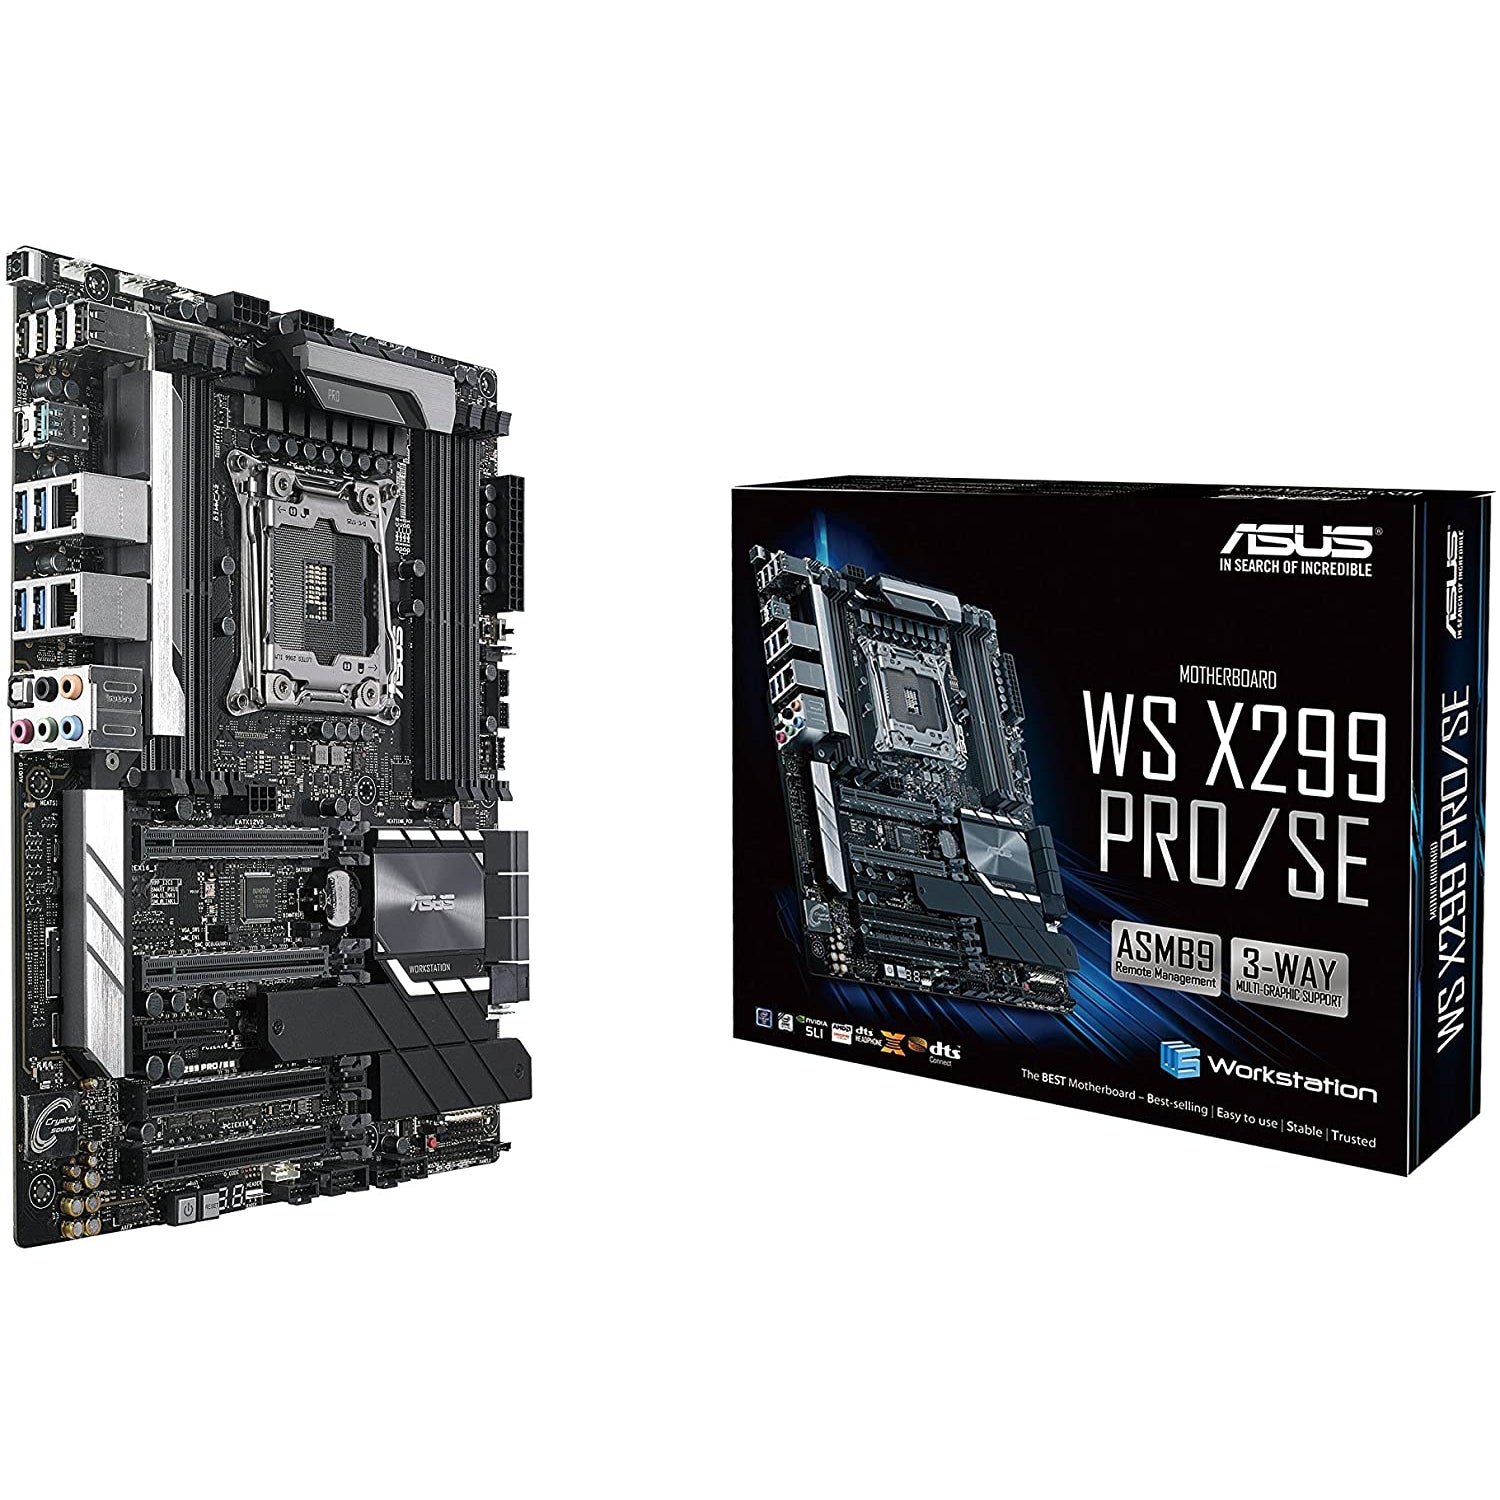 ASUS WS X299 PRO/SE 2066 Intel X299 ATX Workstation Motherboard 90SW00A0-M0EAY0 - Excellent